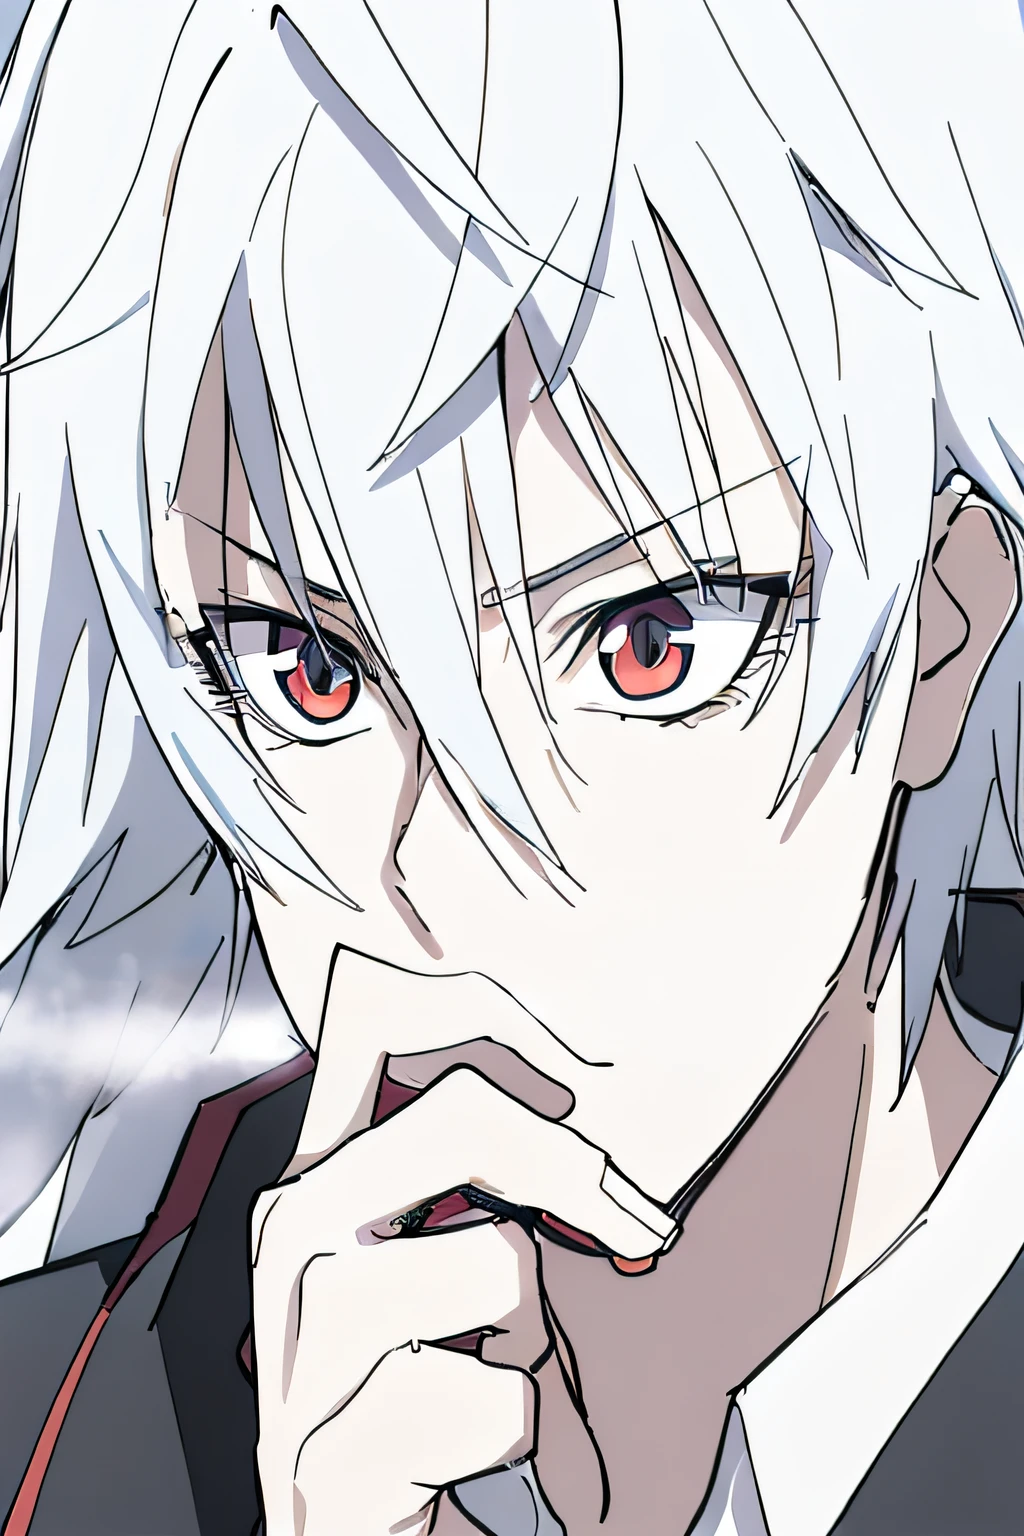 A handsome anime character，His name is Hajim Yatat，He has white hair and red eyes。His expression is extremely detailed and beautiful。He is from cartoons《kaworu nagisa》role，Also《Projectile theory broken》Little Mae-Nagisa in the series。His movements and postures are very attractive，It shows his young and handsome image。He also has a unique characteristic，That is, with the charm of Gapmoe Yandere。Please create a handsome charm、Extremely detailed and beautiful face and eye image。